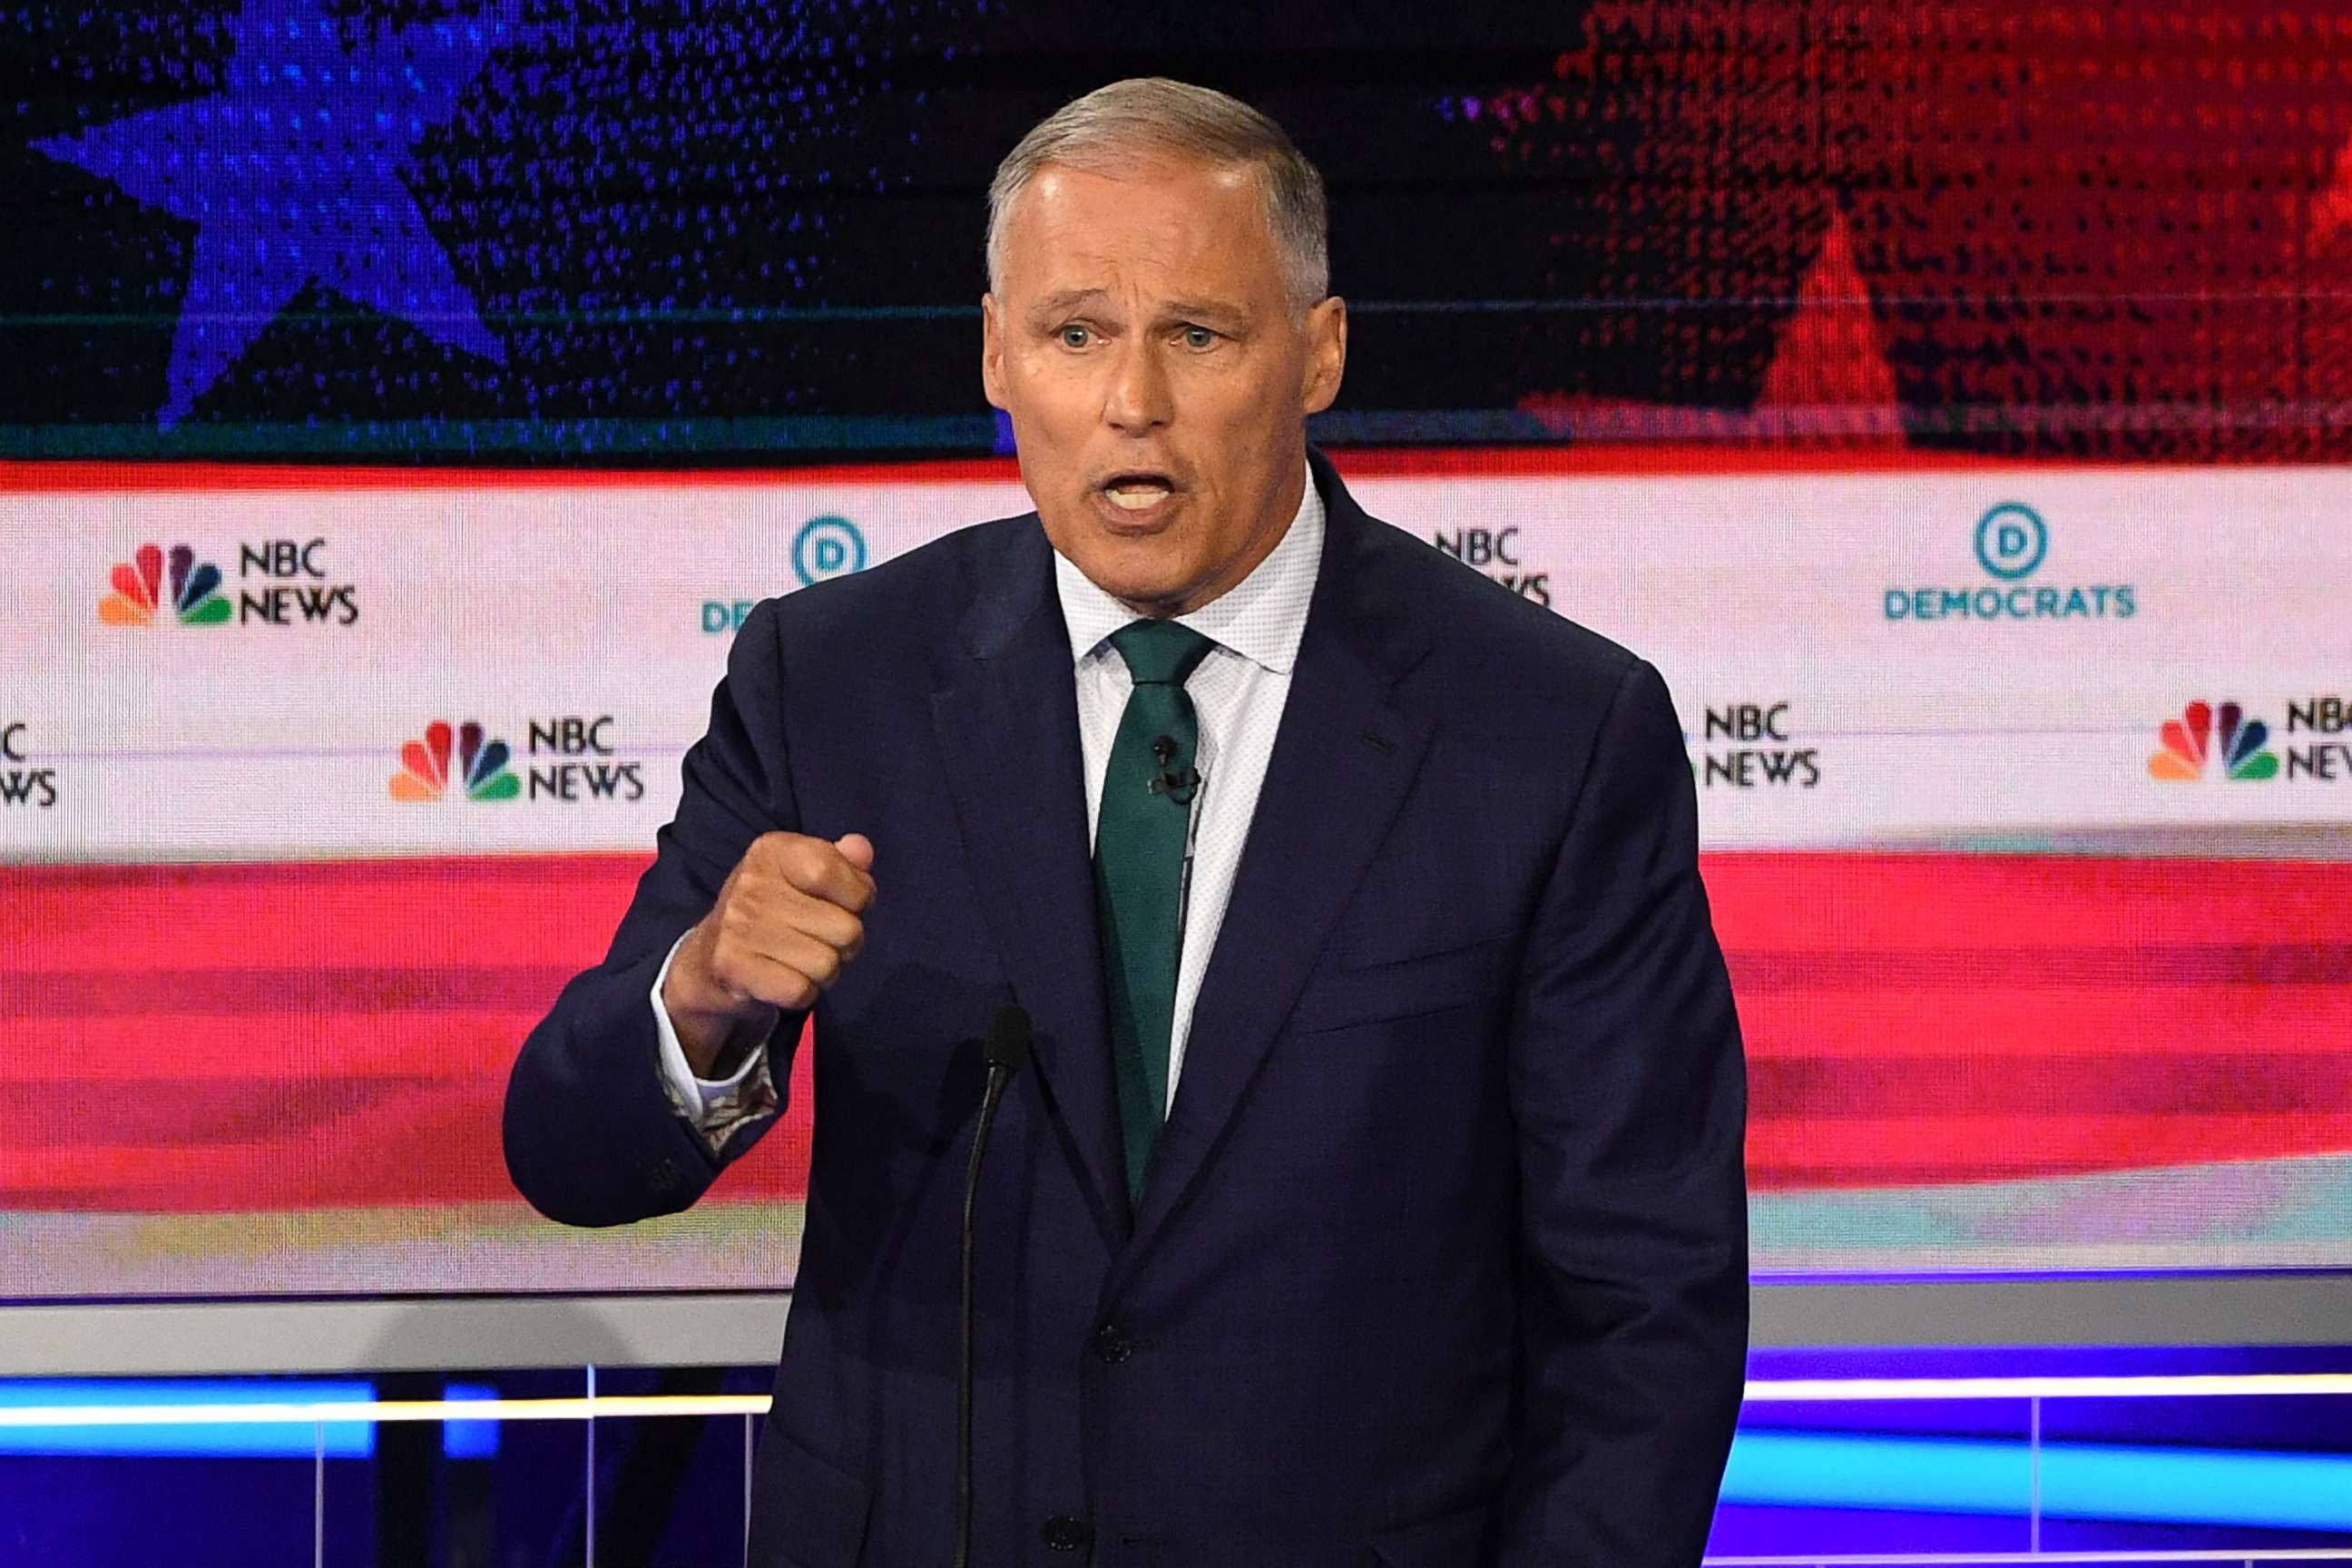 PHOTO: Jay Inslee participates in the first Democratic primary debate hosted by NBC News at the Adrienne Arsht Center for the Performing Arts in Miami, Florida, June 26, 2019.